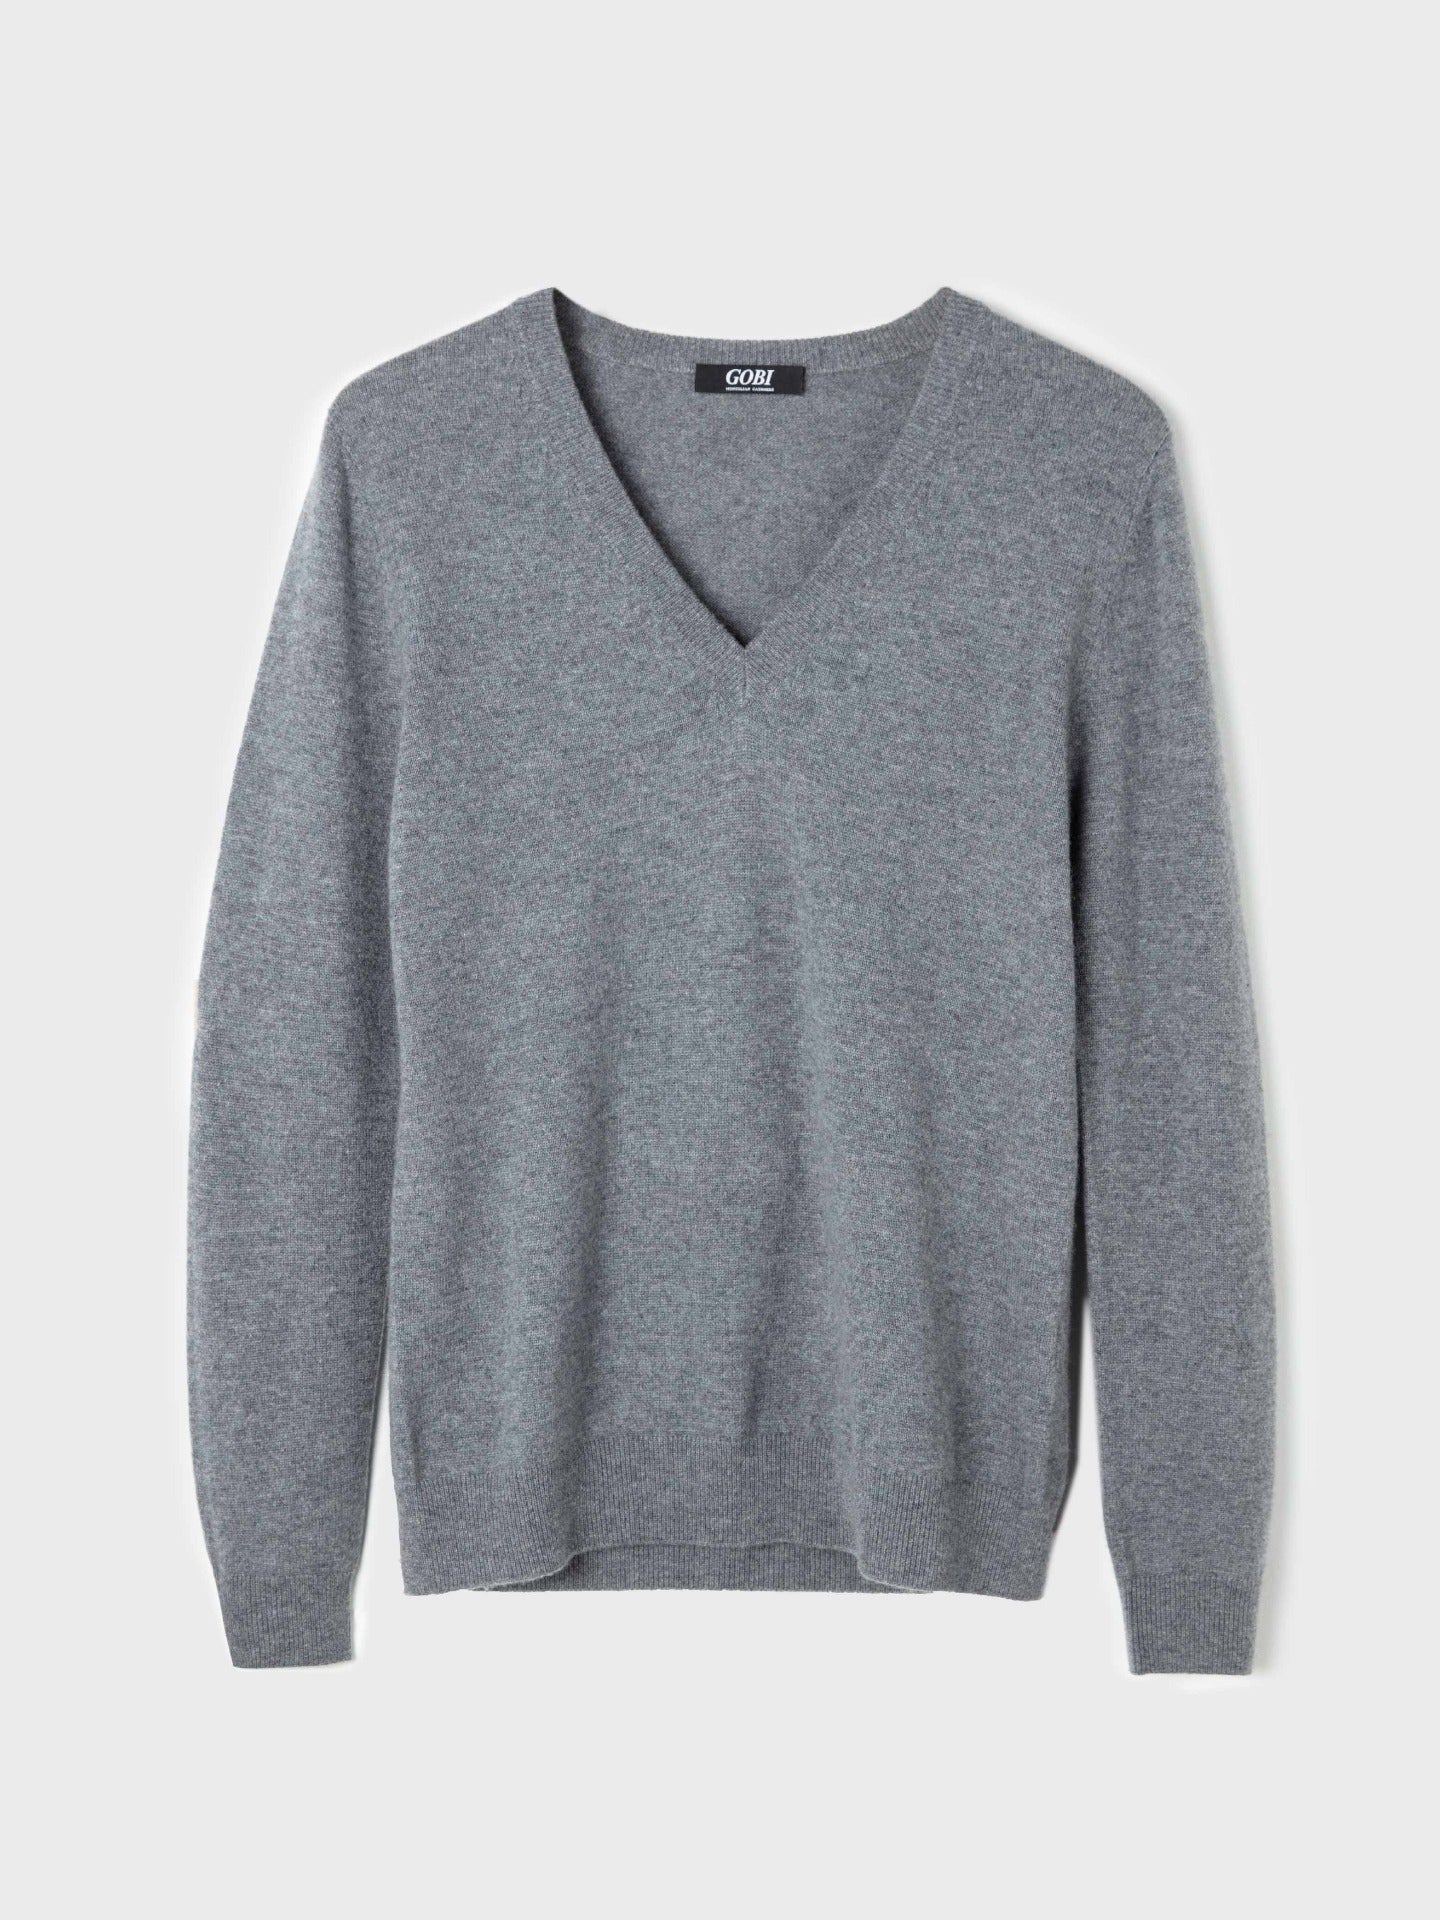 Elegance with Women's Cashmere Sweaters | GOBI Cashmere